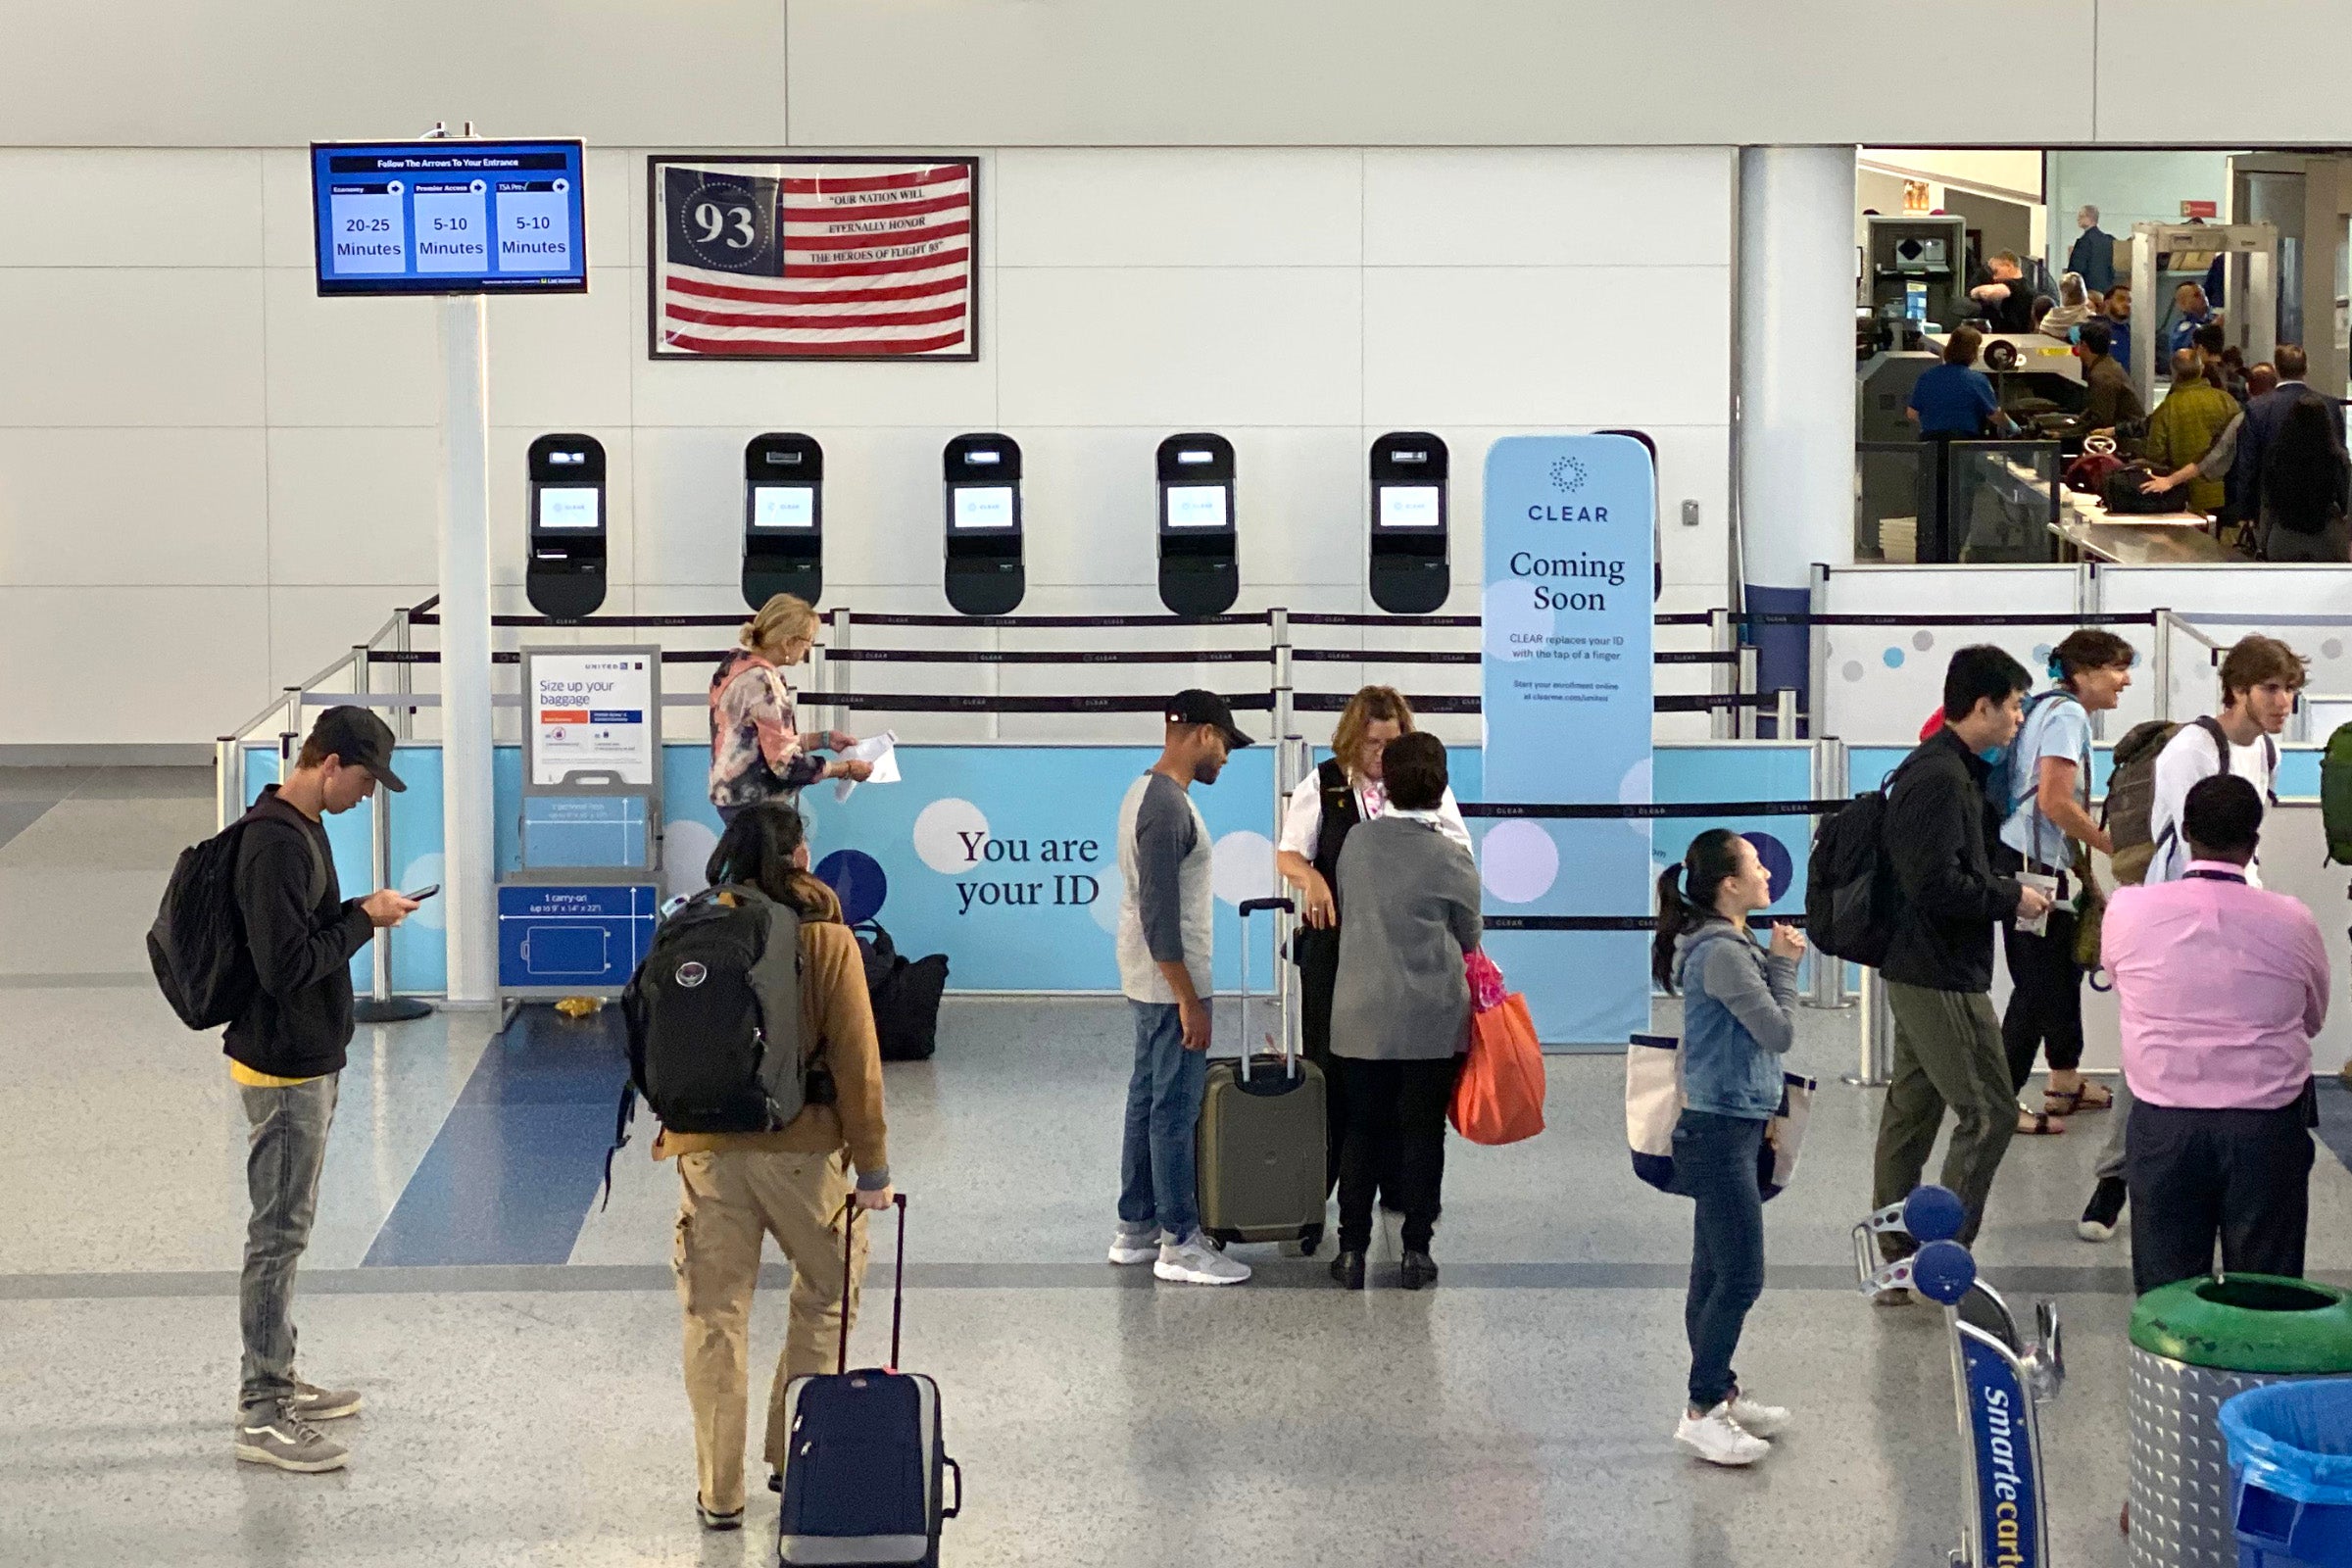 United has added Clear checkpoints throughout the U.S., including here at Newark's Terminal C. (Photo by Zach Honig/The Points Guy)